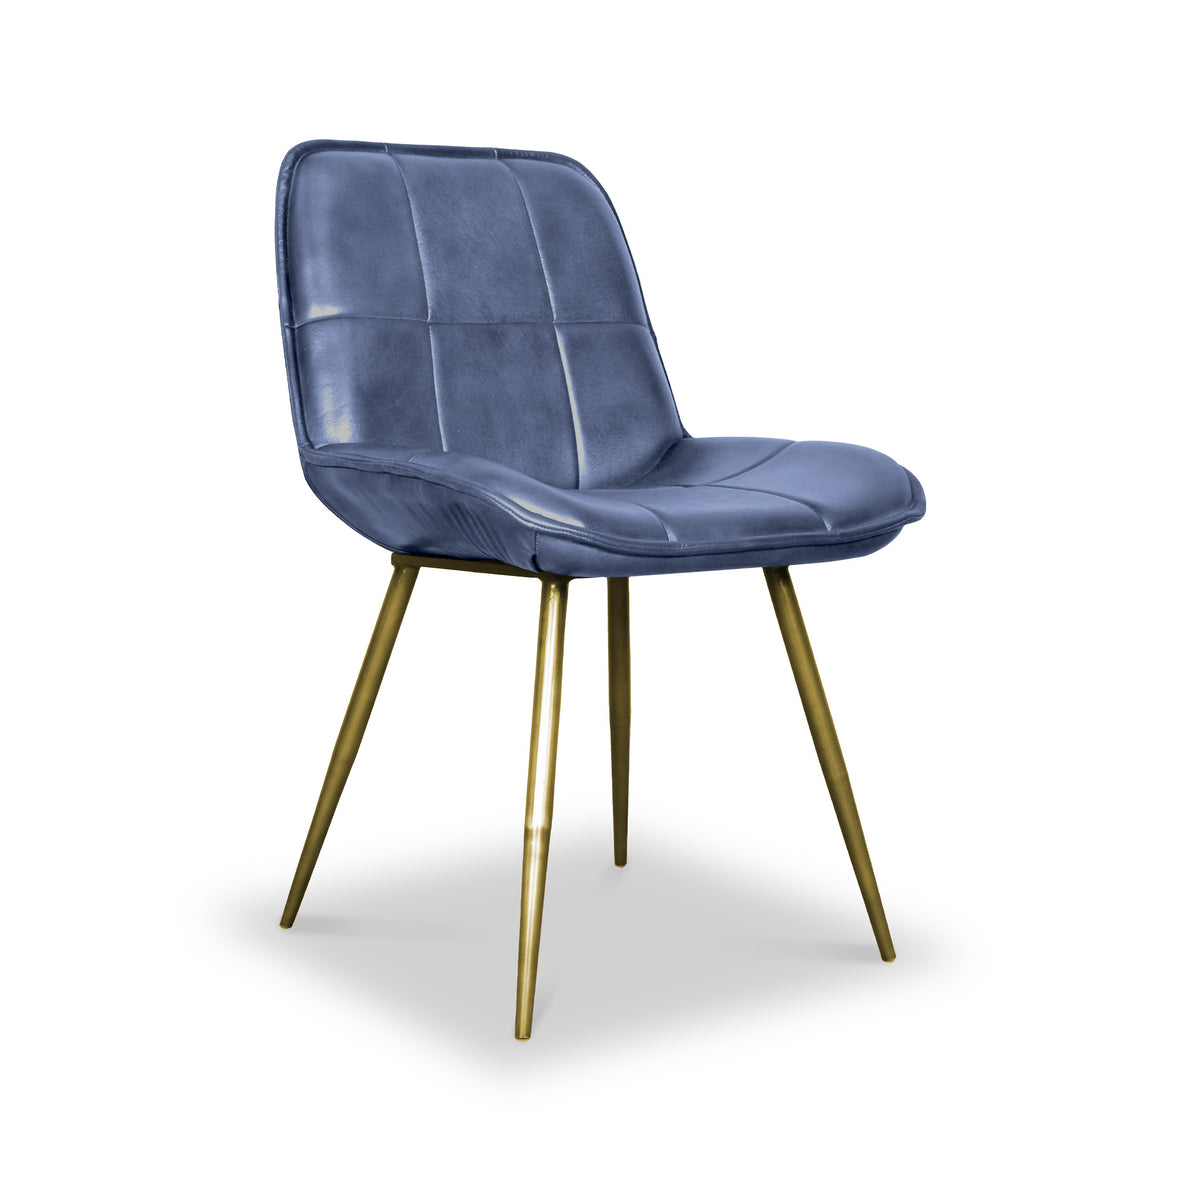 Danica Blue Buffalo Leather Dining Chair from Roseland Furniture